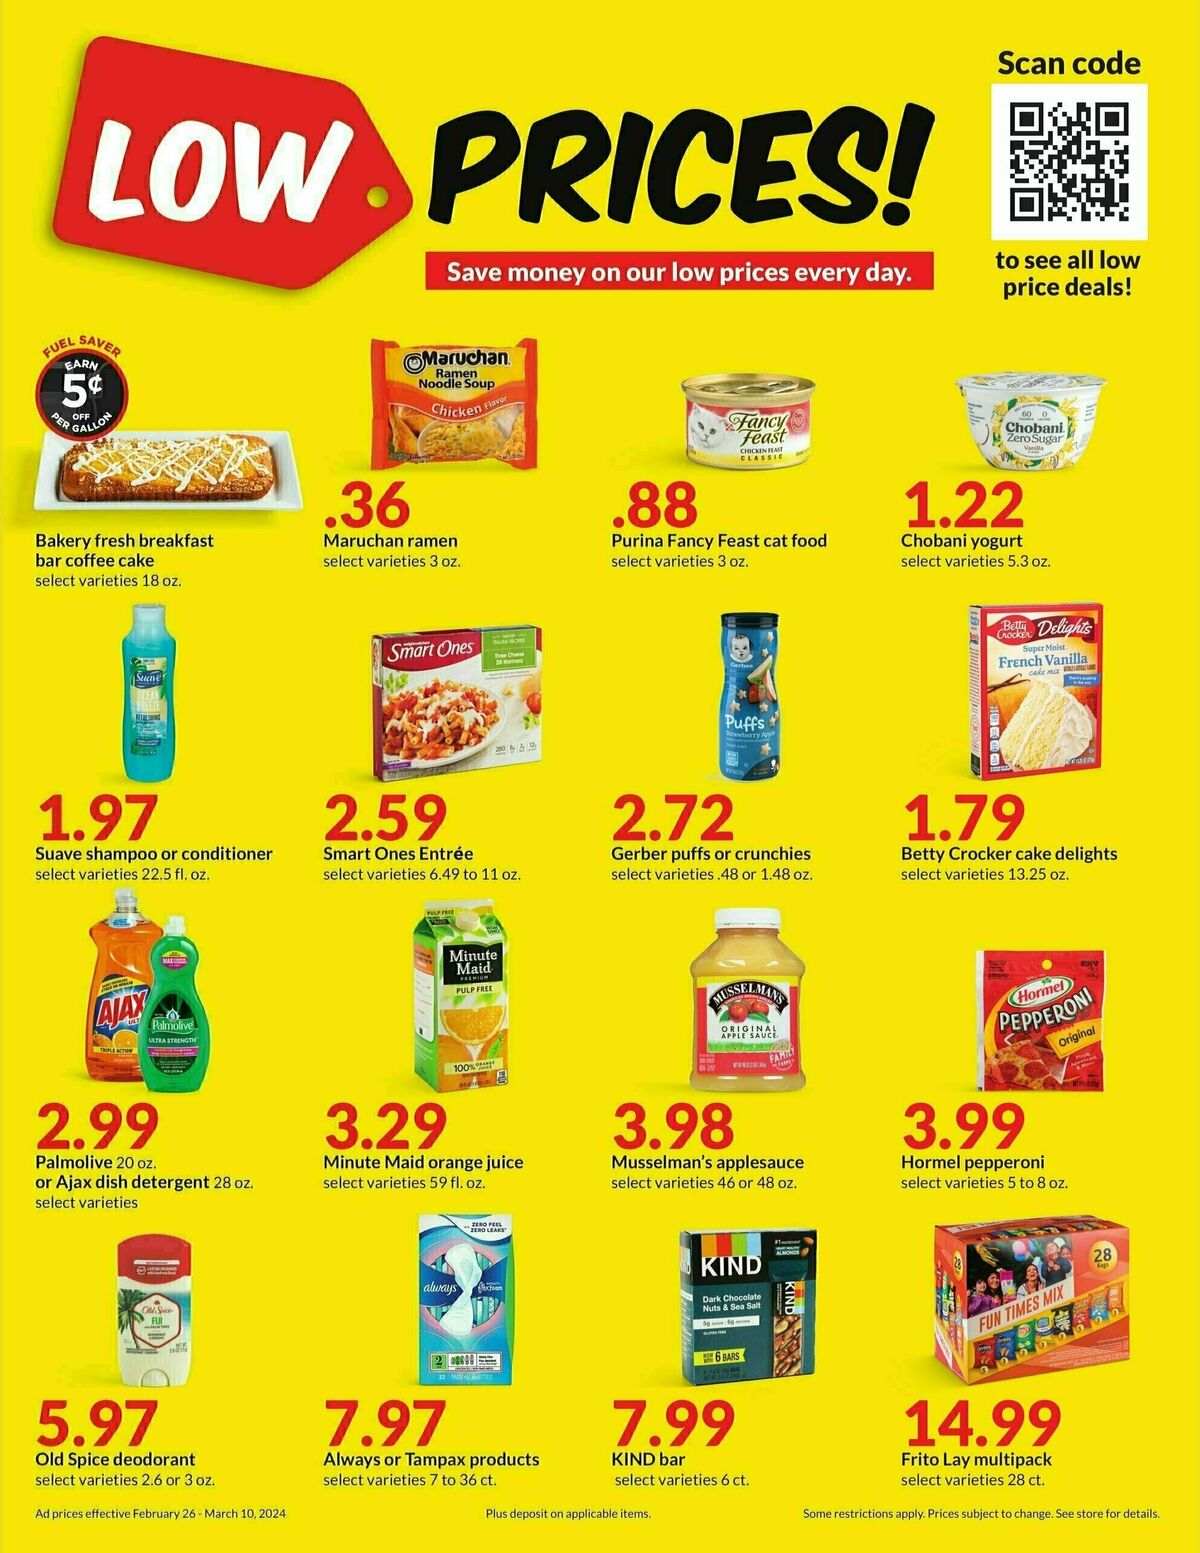 Hy-Vee 2 Week Fuel Saver Deals Weekly Ad from February 26